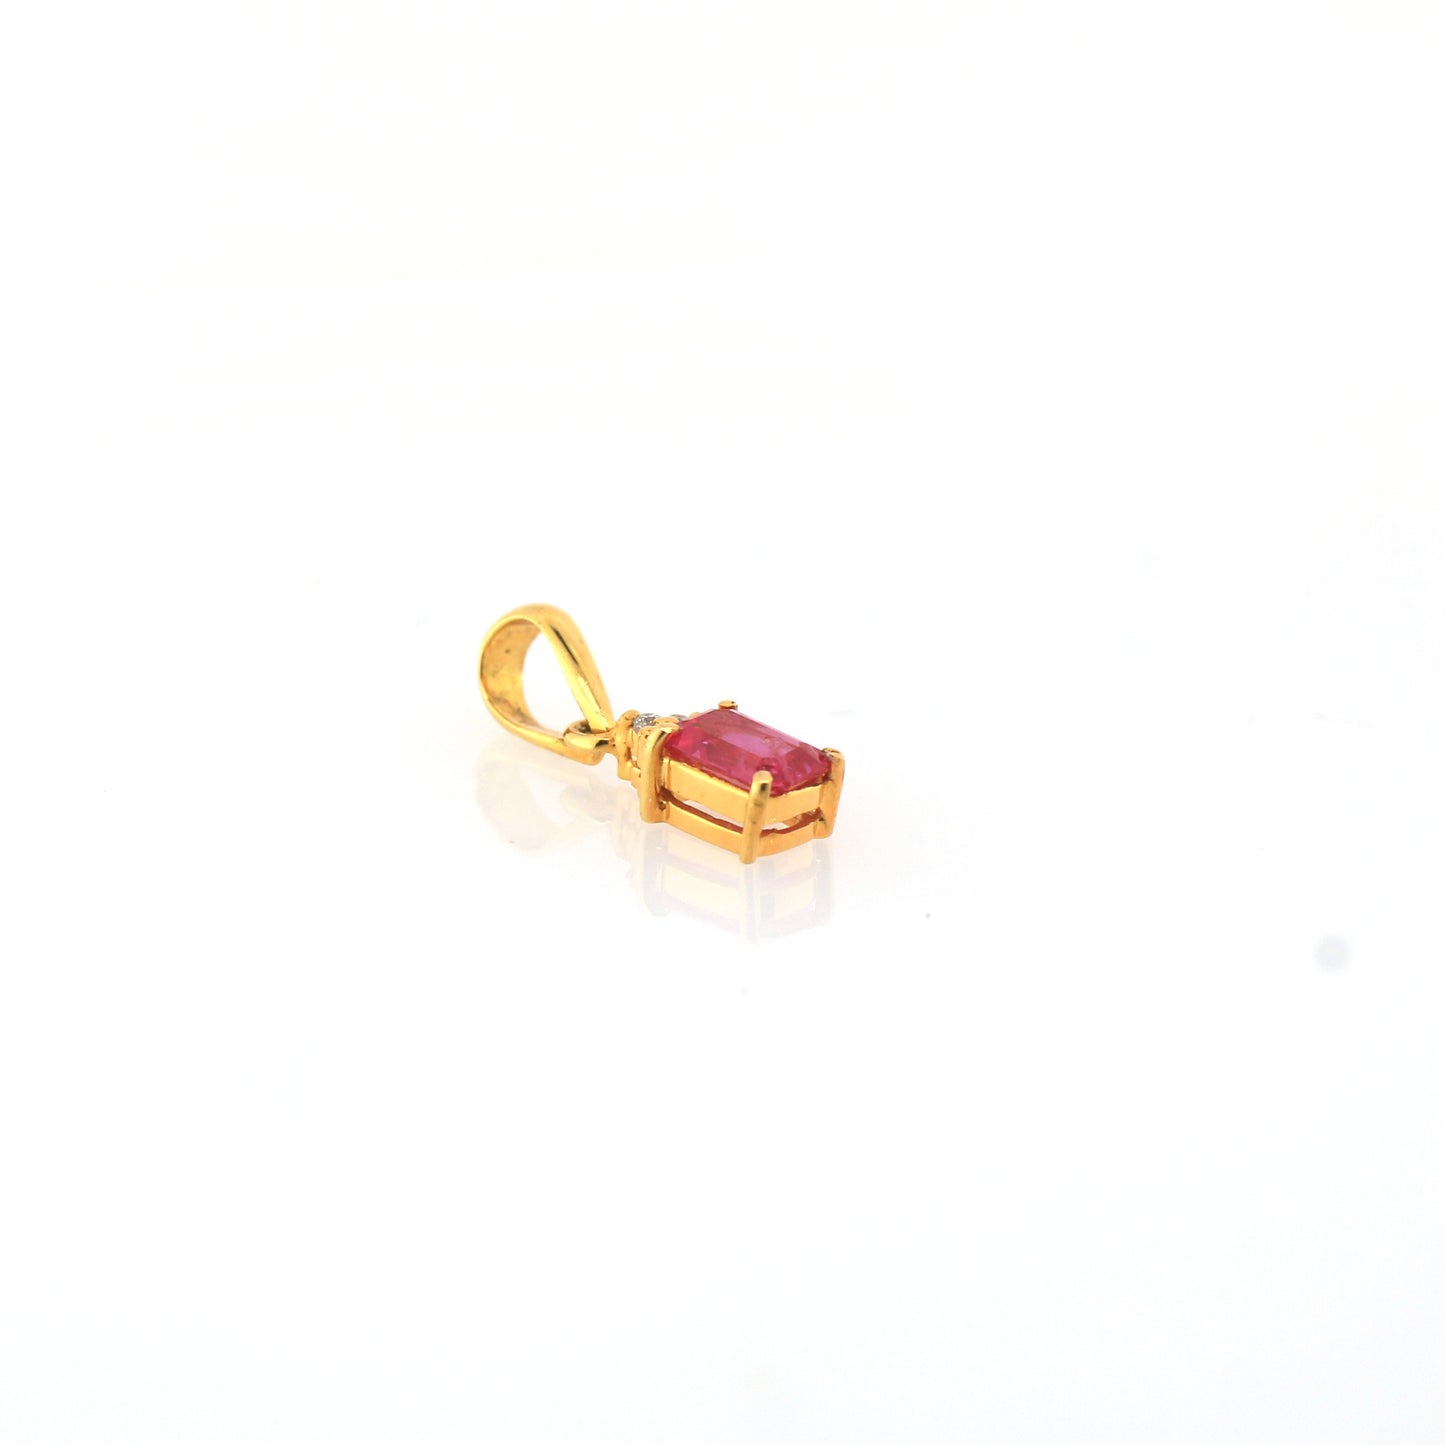 Pink Sapphire Pendent - 14k yellow Gold 1.10g